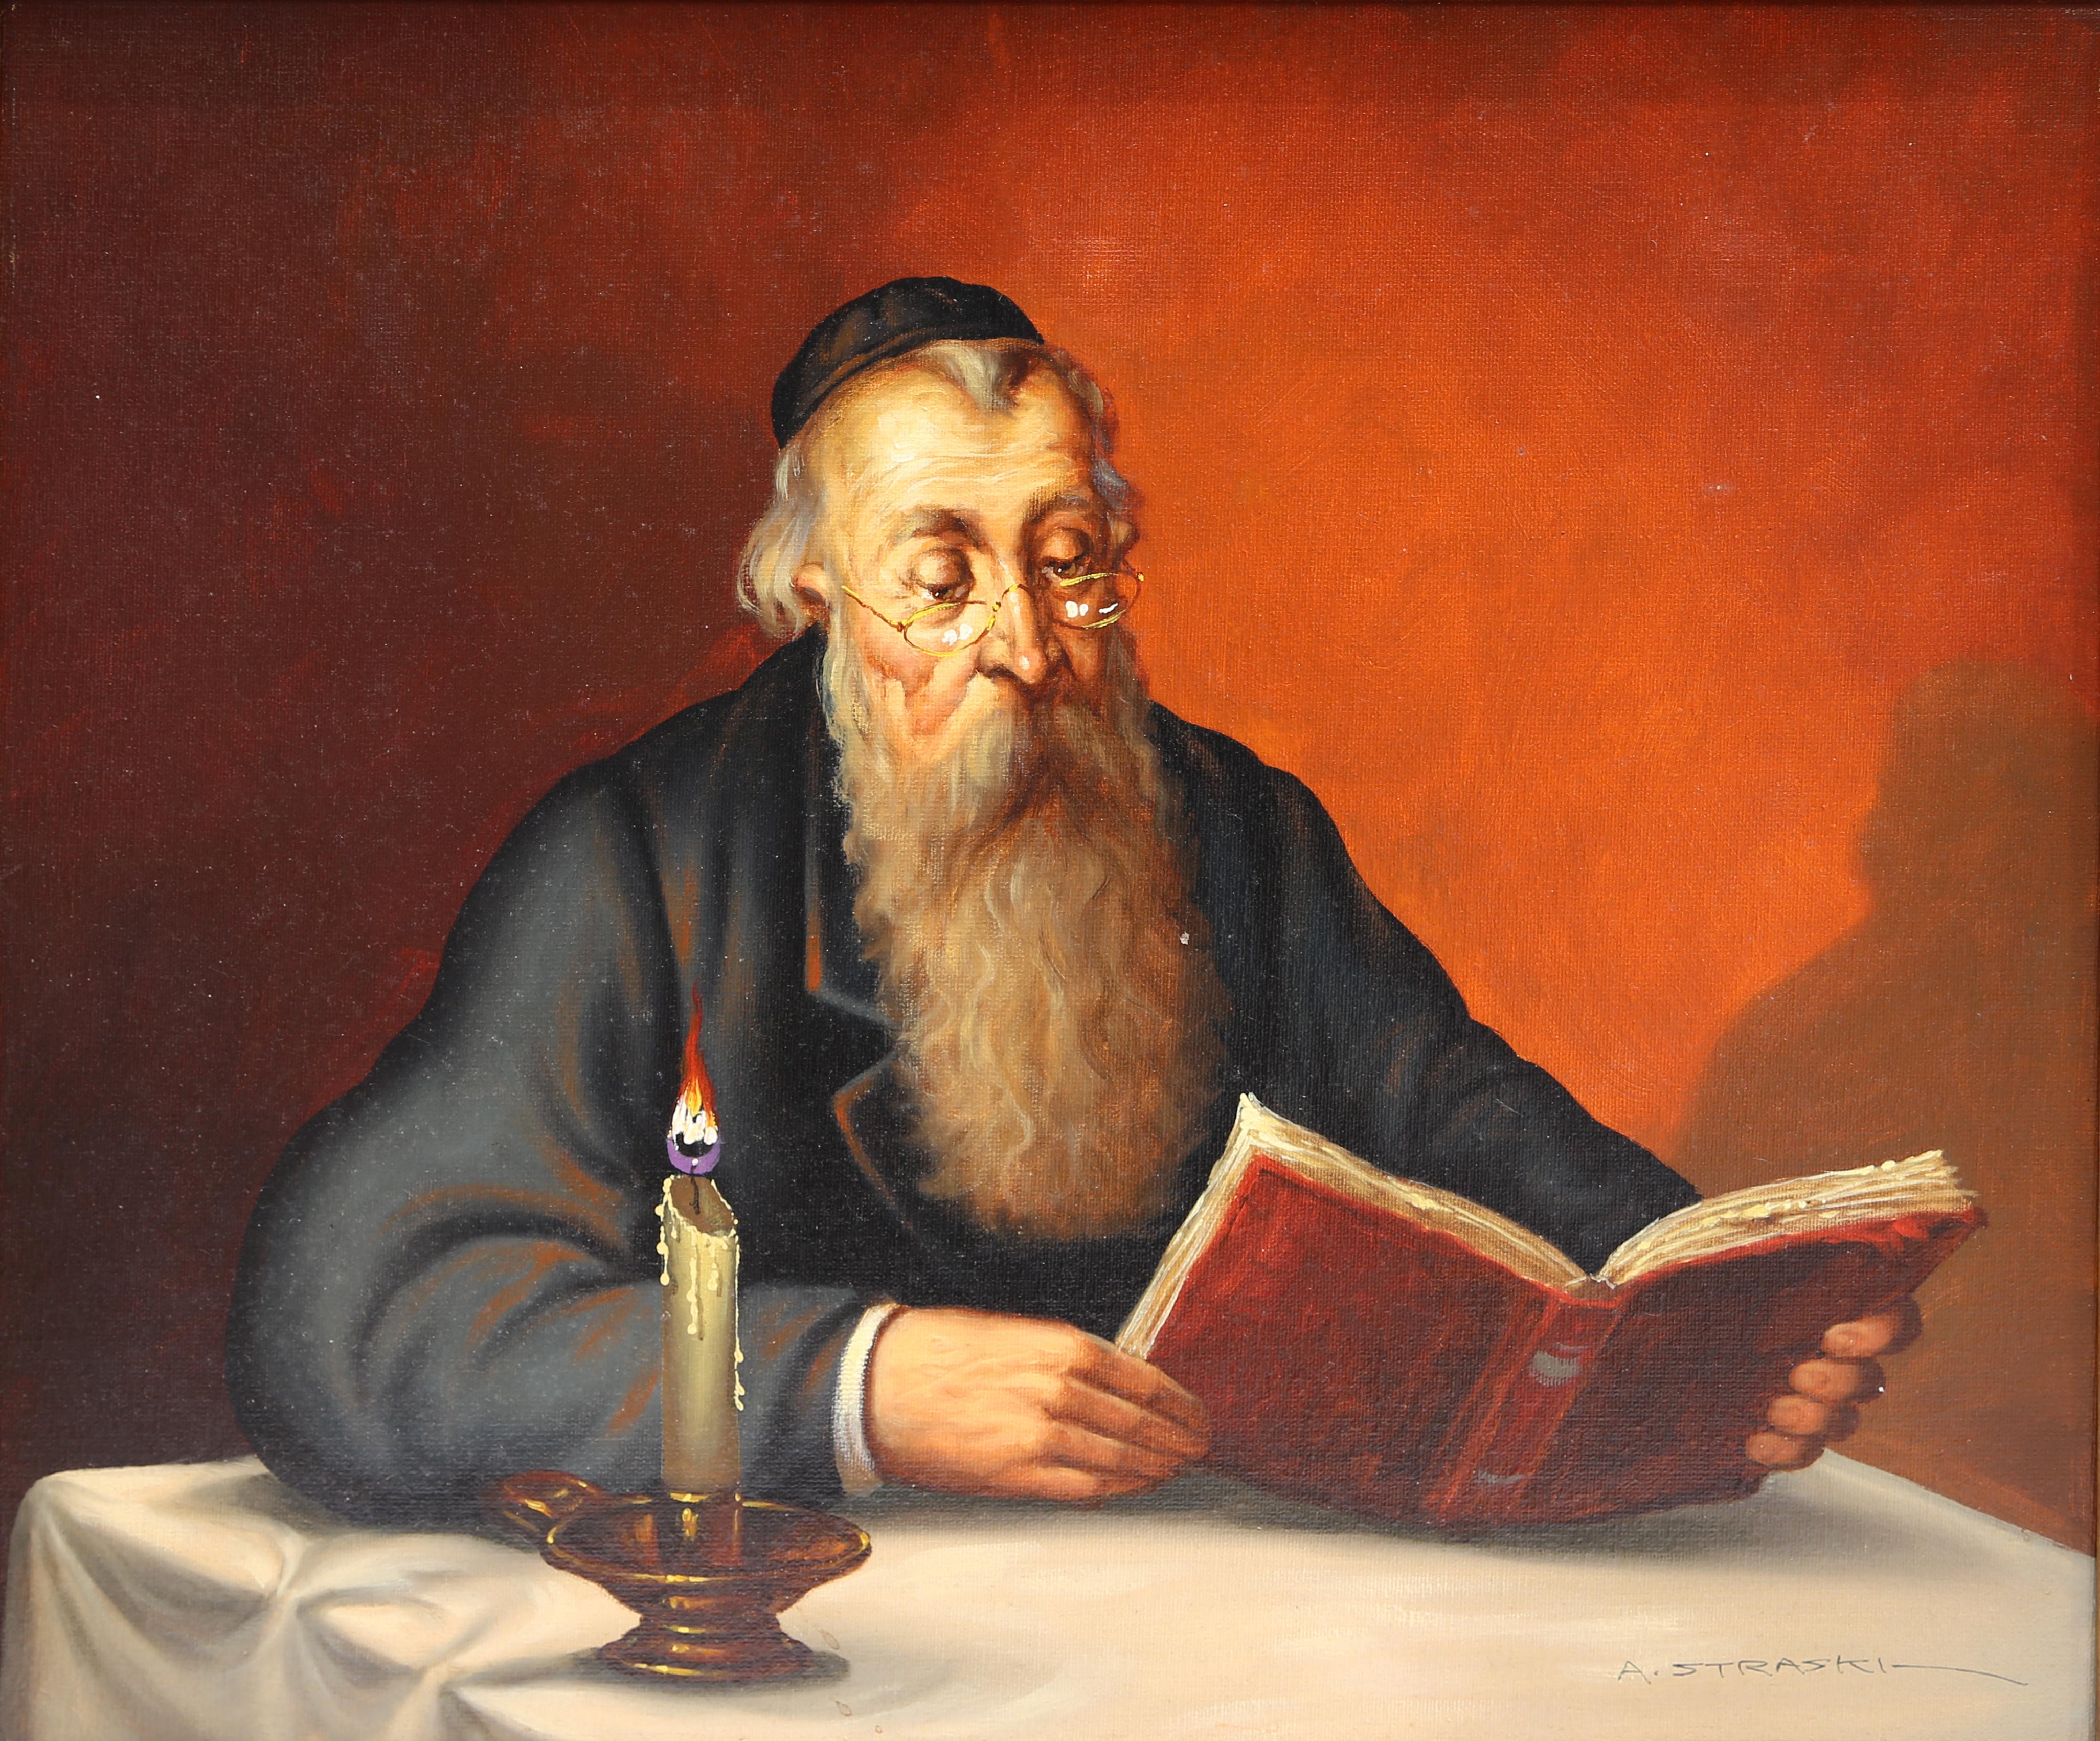 Rabbi Reading by Candlelight (9-F)
Abraham Straski, Polish (1903–1987)
Date: 1959
Oil on Canvas, signed and dated
Size: 20 x 23 in. (50.8 x 58.42 cm)
Frame Size: 31 x 34 inches